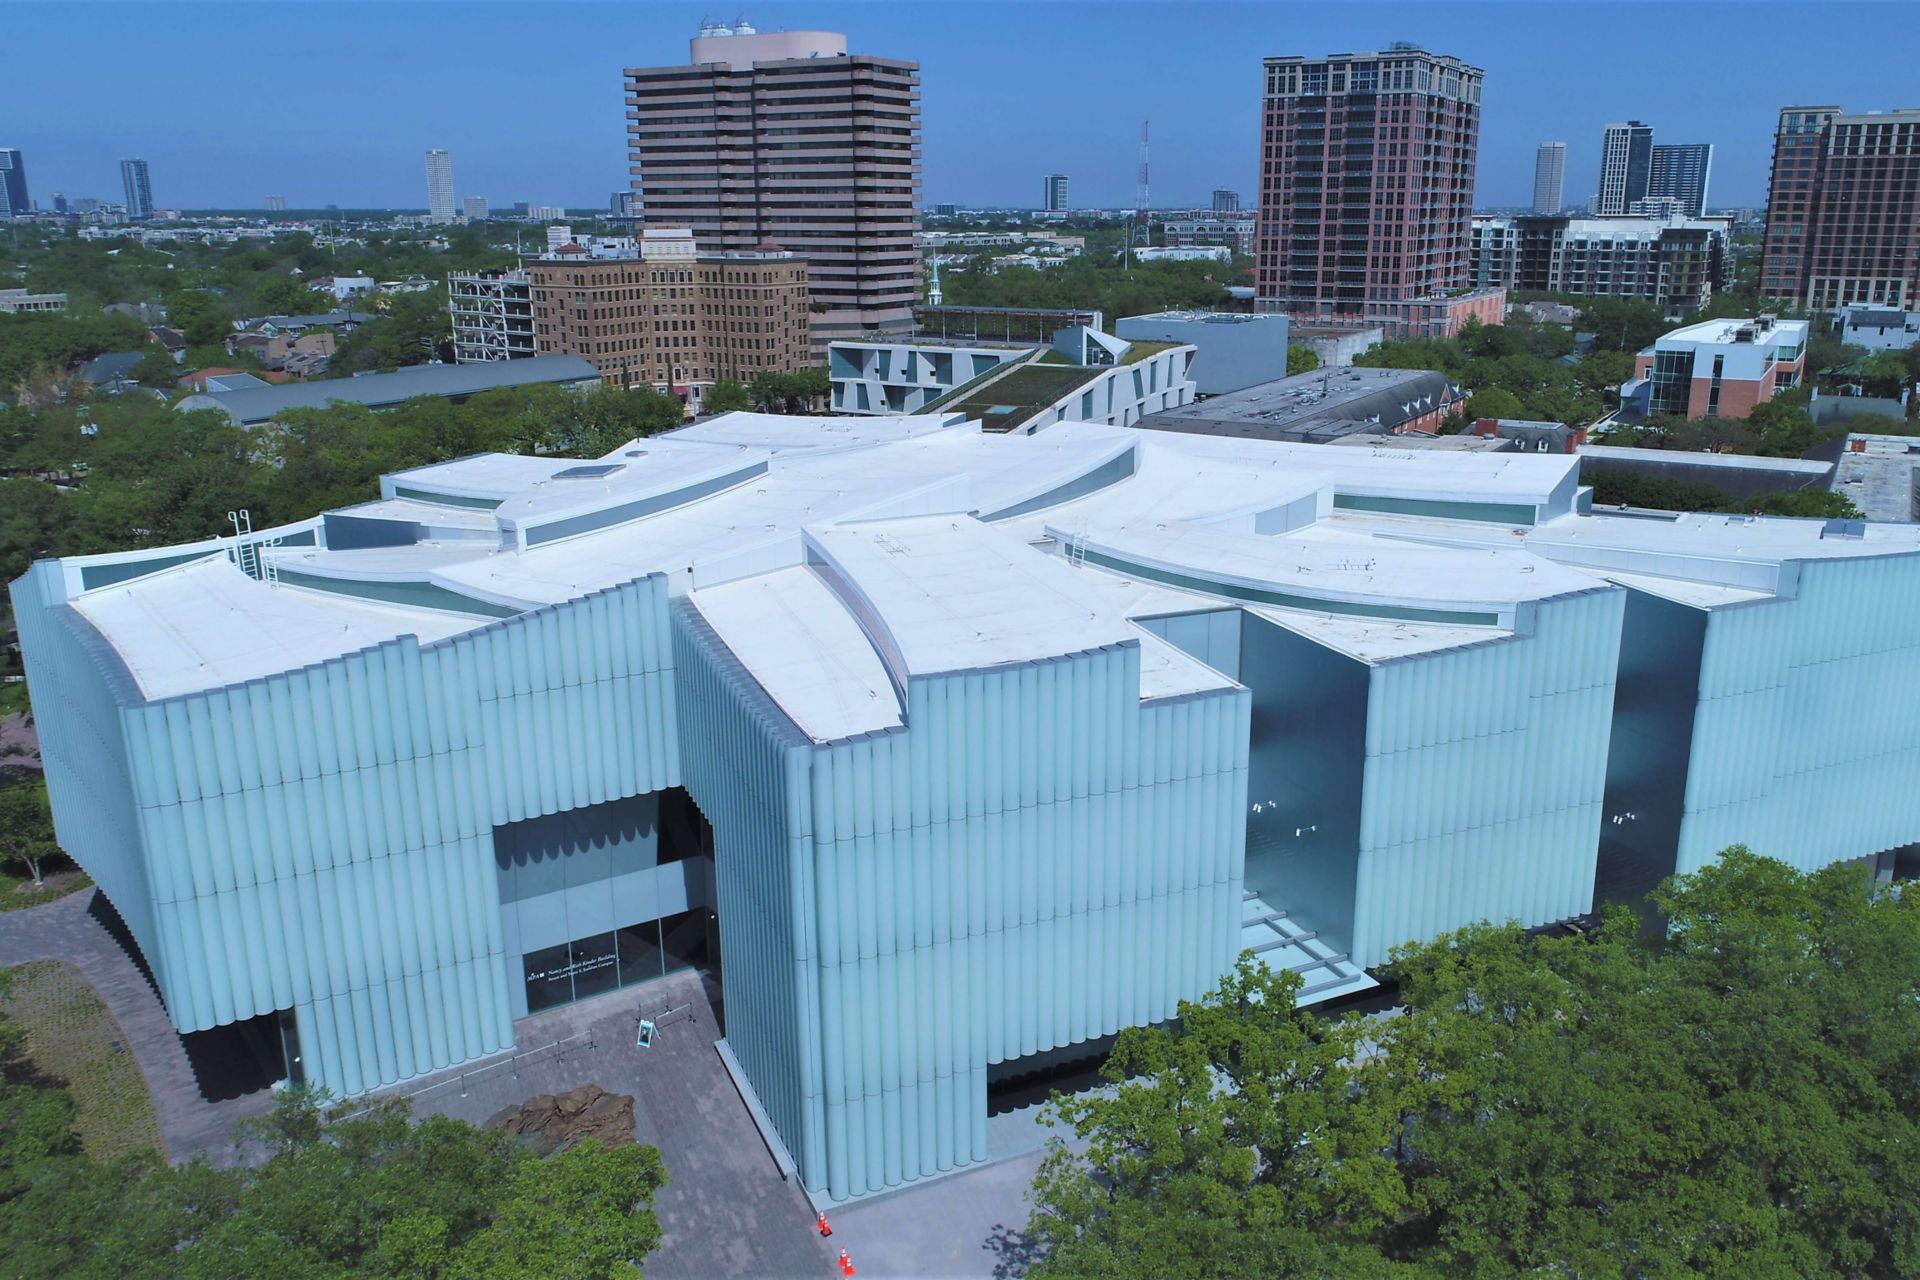 Aerial view of the Houston Museum of Fine Arts showing a white Sarnafil roofing membrane with a city skyline in the background.  